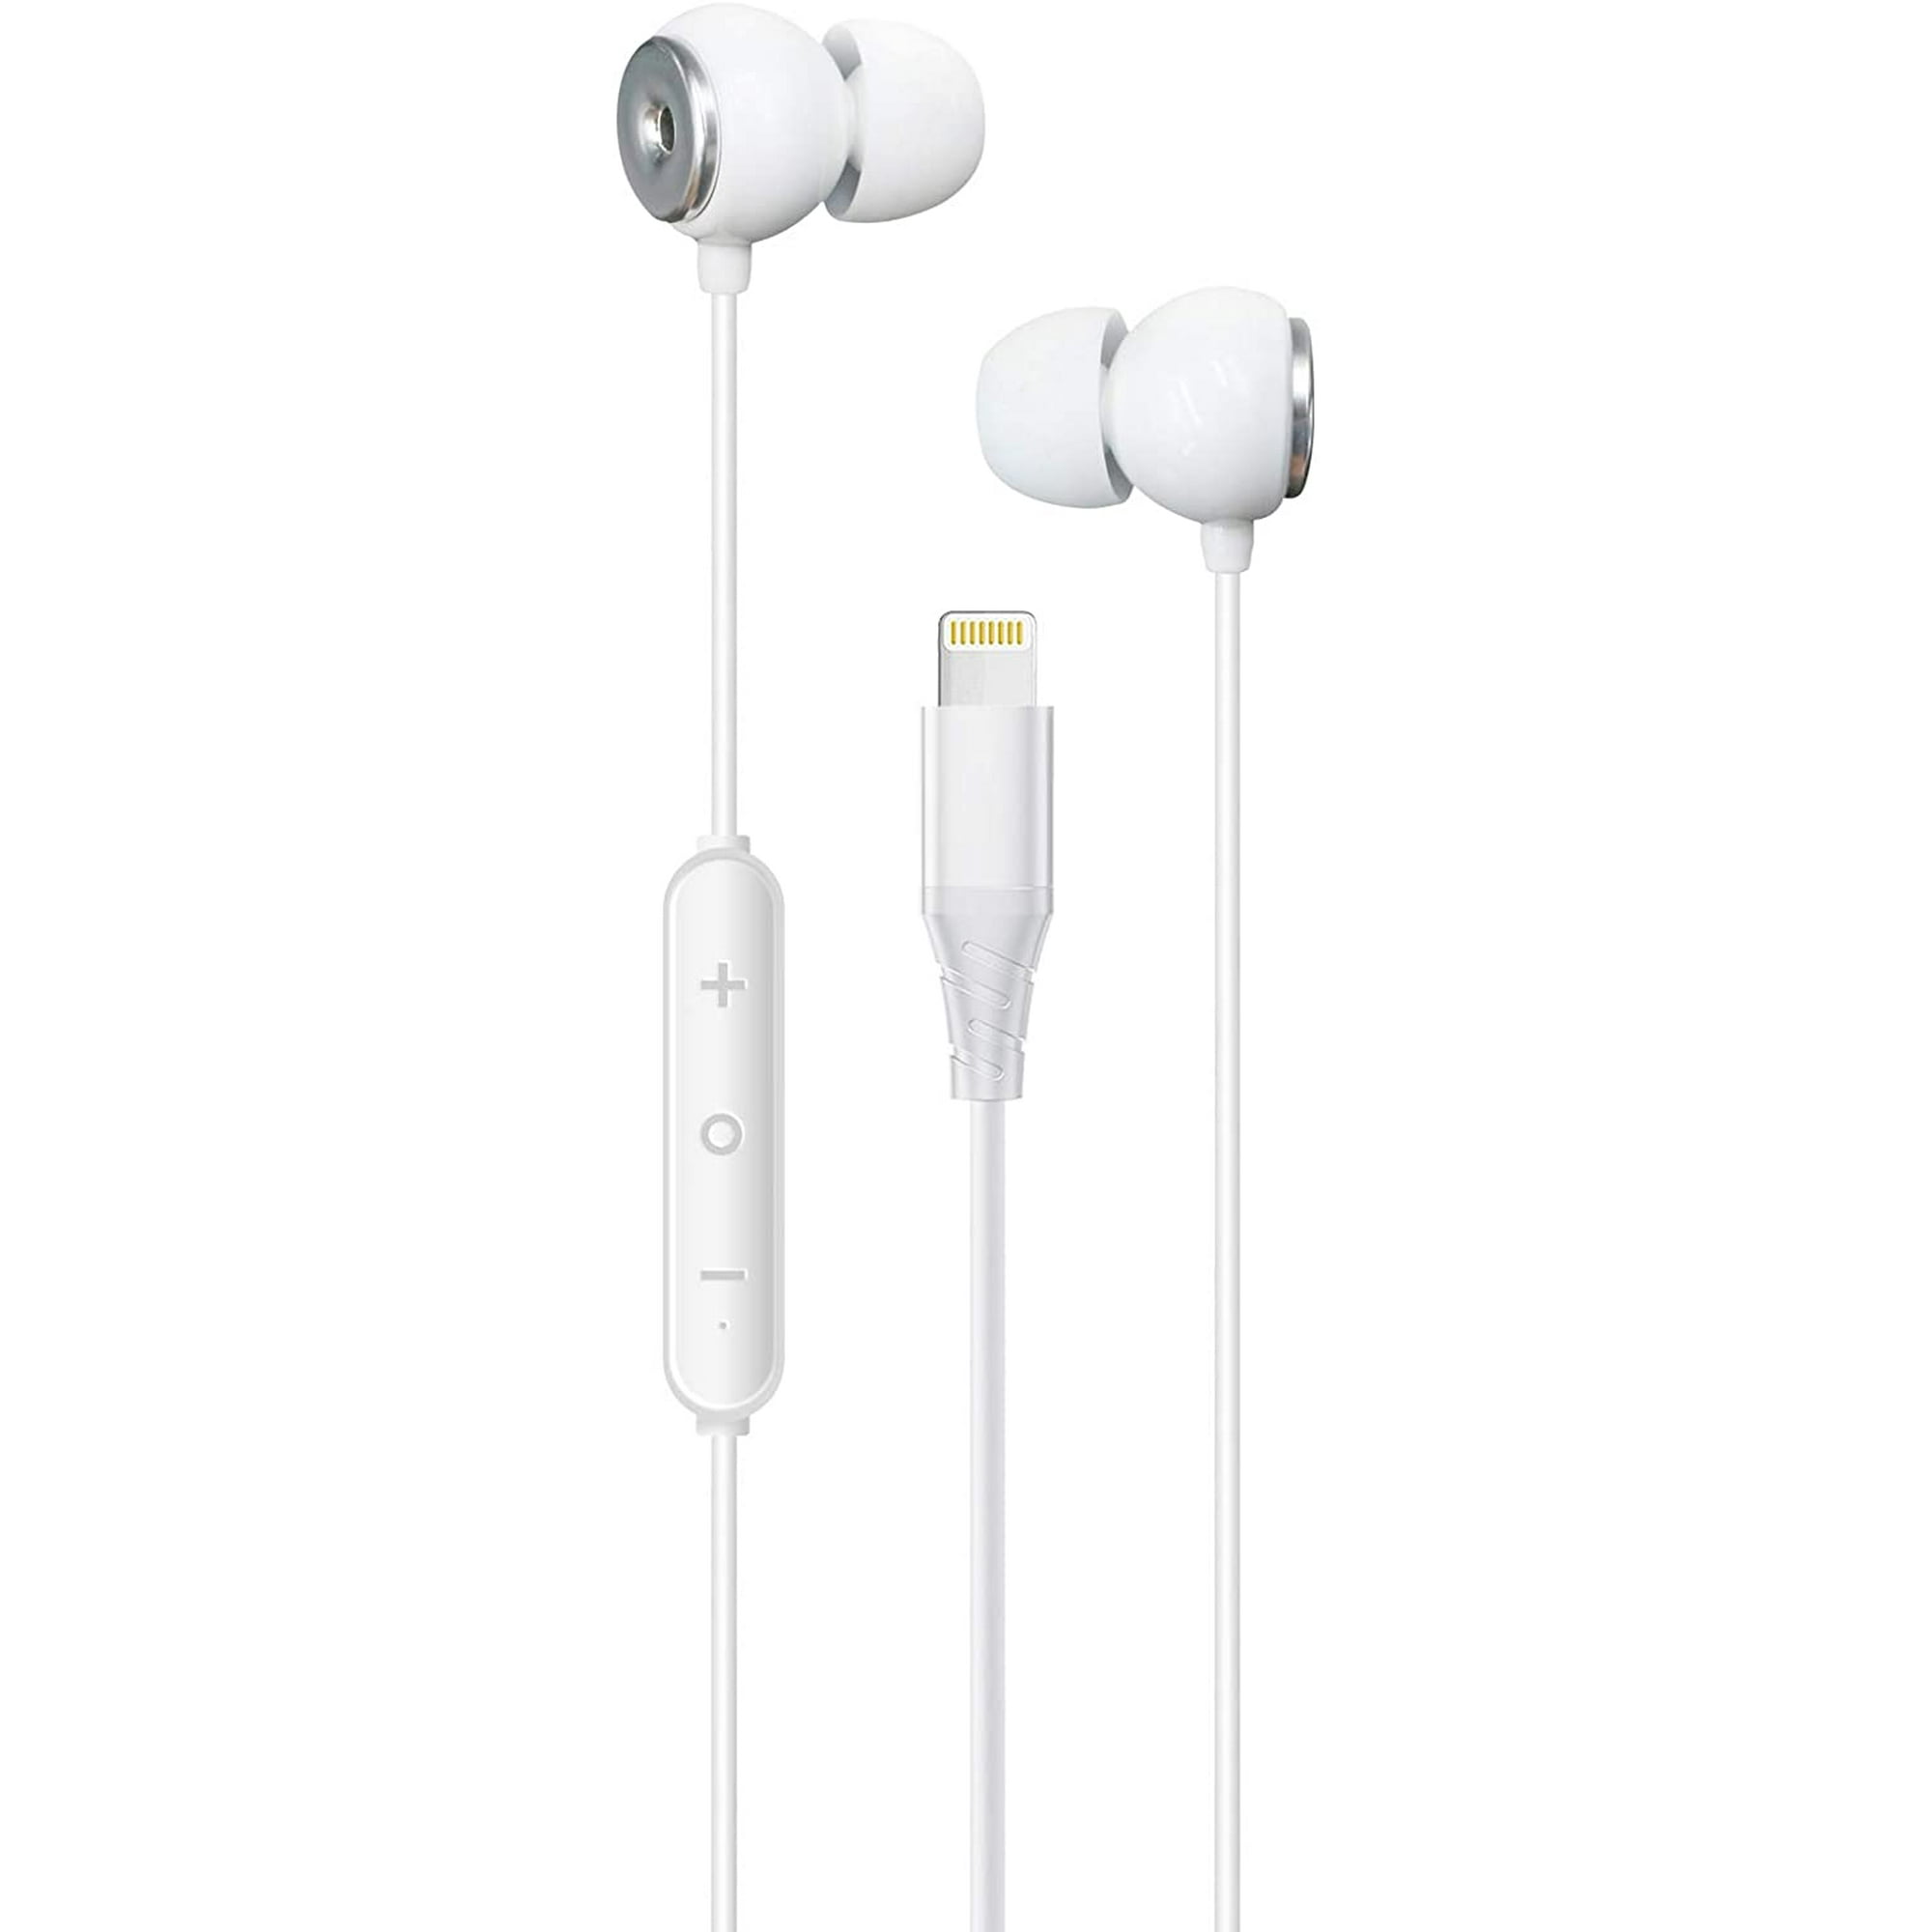 Realm Lightning Earbuds for iPhone Apple MFi Certified Headphones with  Lightning Connector in Ear Headphones with Built | Walmart Canada